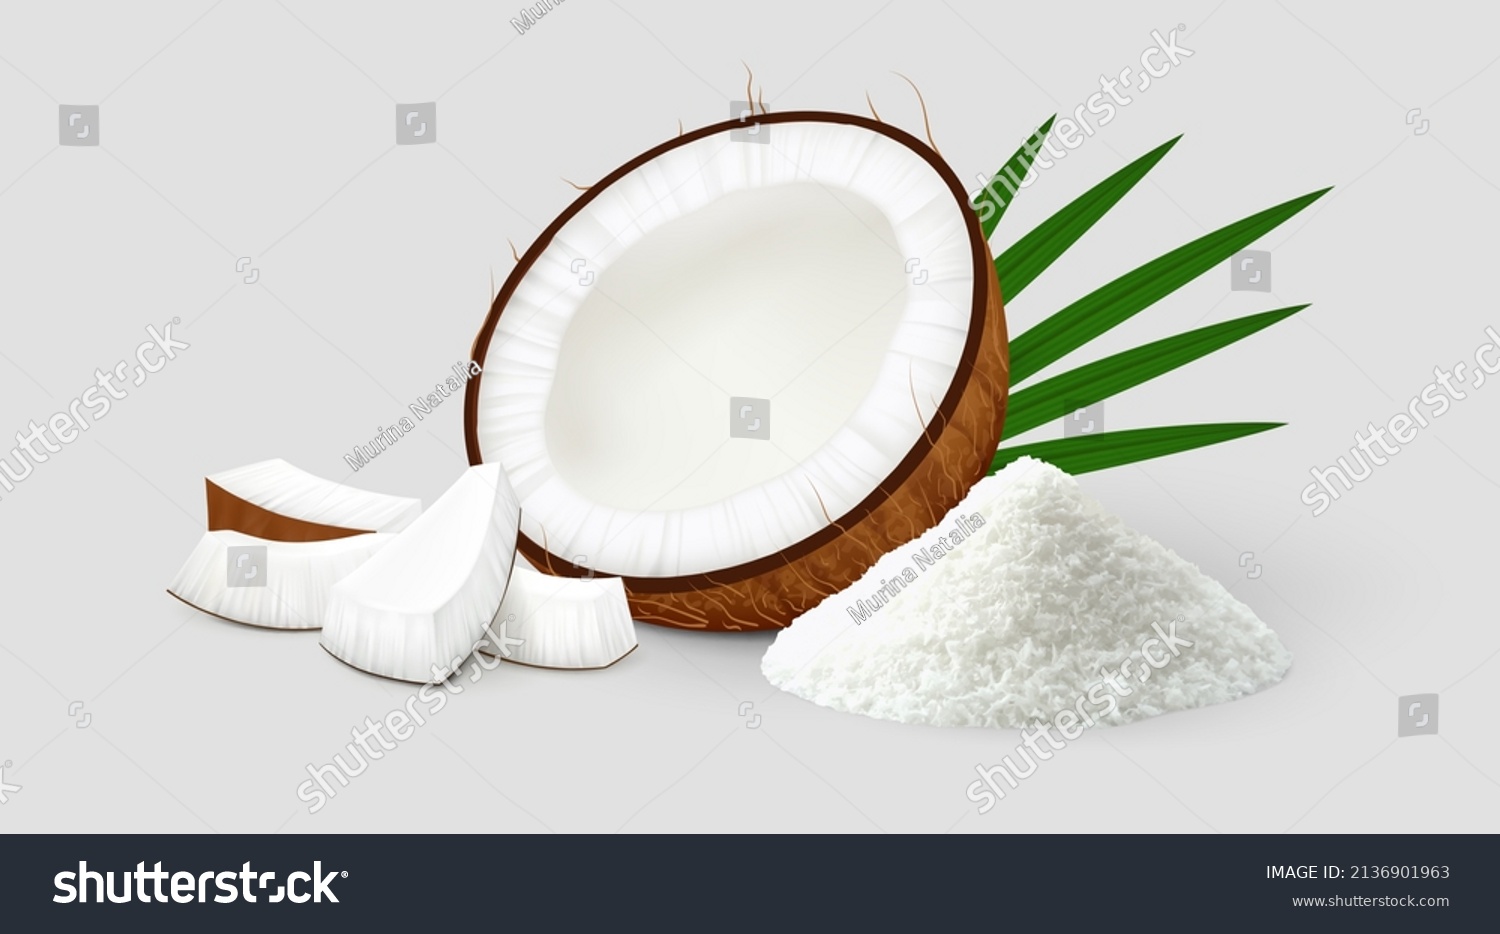 SVG of Halved coco fruit with several pieces, palm leaves and pile of coconut flakes isolated on gray background. Realistic vector illustration. Side view. svg